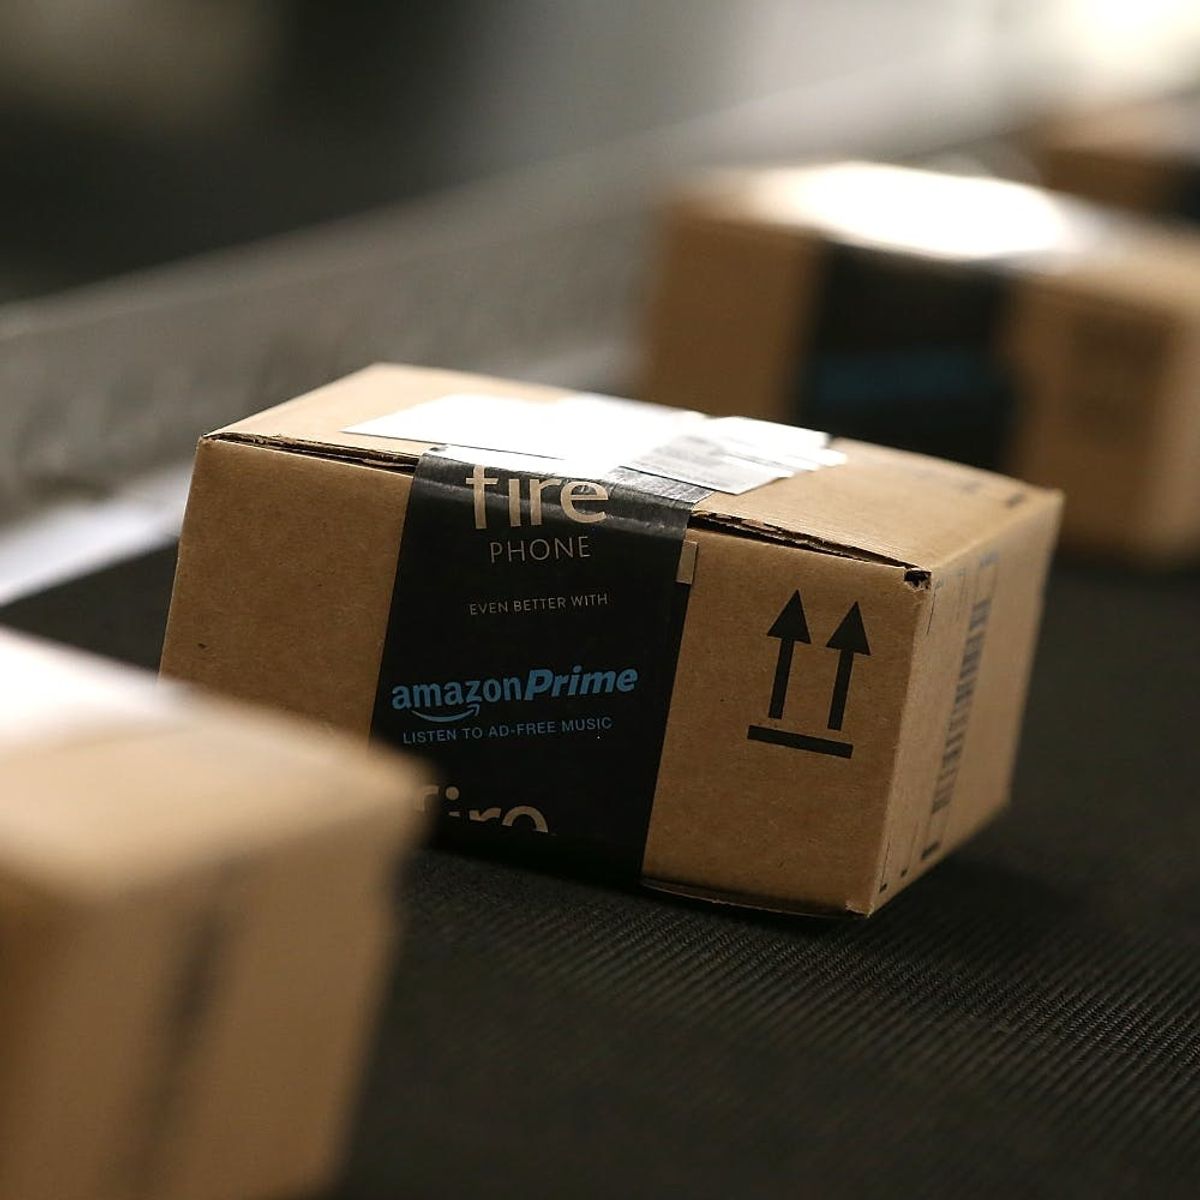 You Might Have Free Amazon Credits Lingering in Your Account